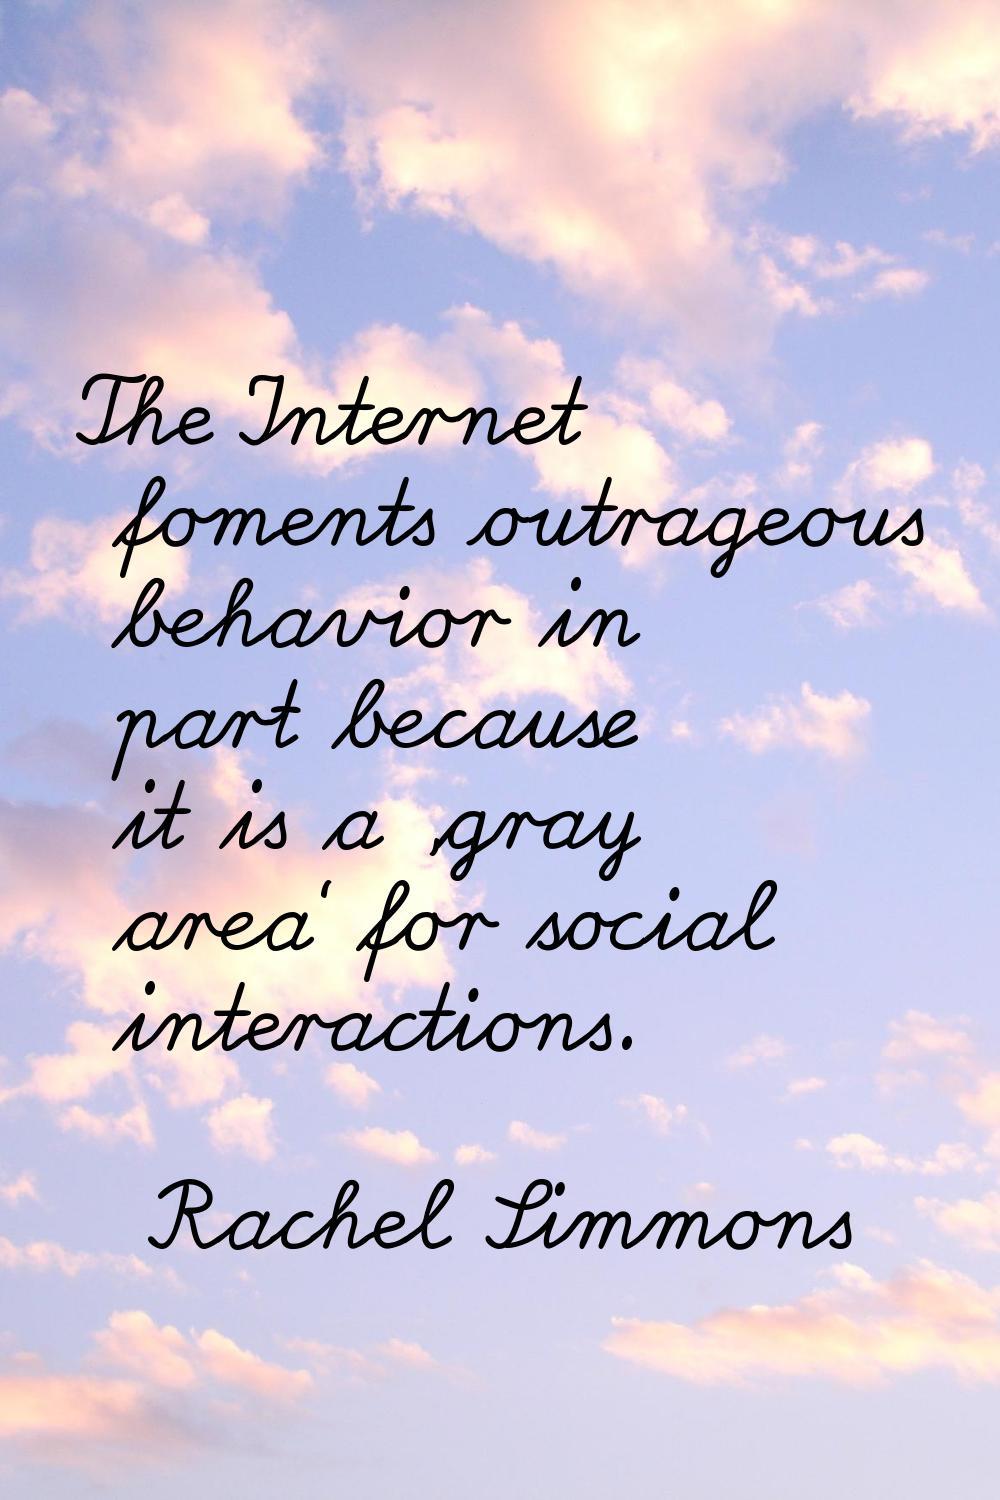 The Internet foments outrageous behavior in part because it is a 'gray area' for social interaction